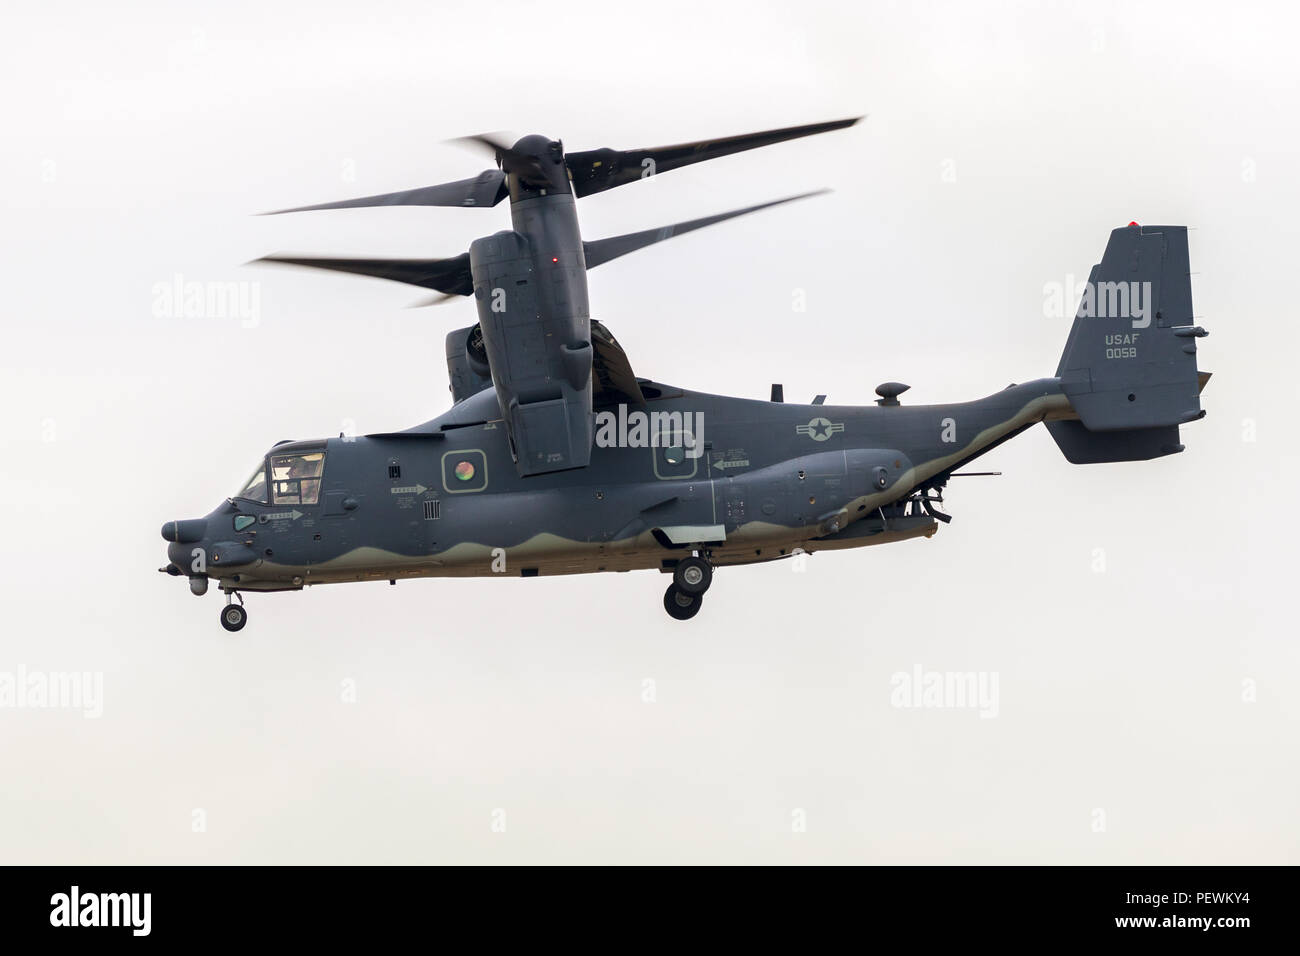 FAIRFORD, UK - JUL 13, 2018: US Air Force CV-22B Osprey aircraft of the 7th SOS in flight over RAF Fairford airbase. Stock Photo